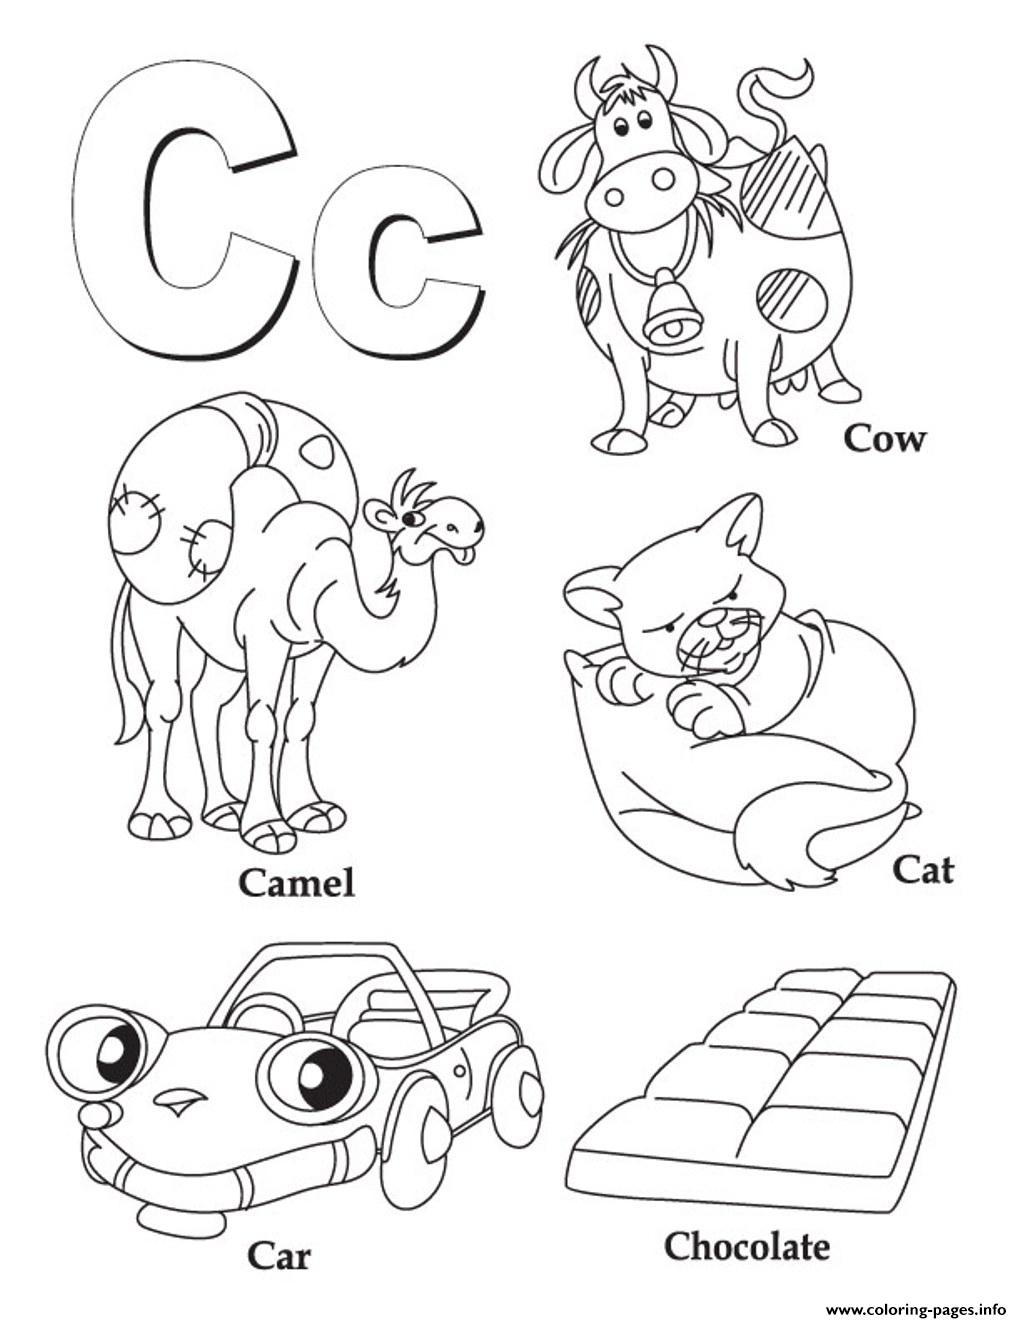 coloring-pages-alphabet-c-printable2388-coloring-page-printable